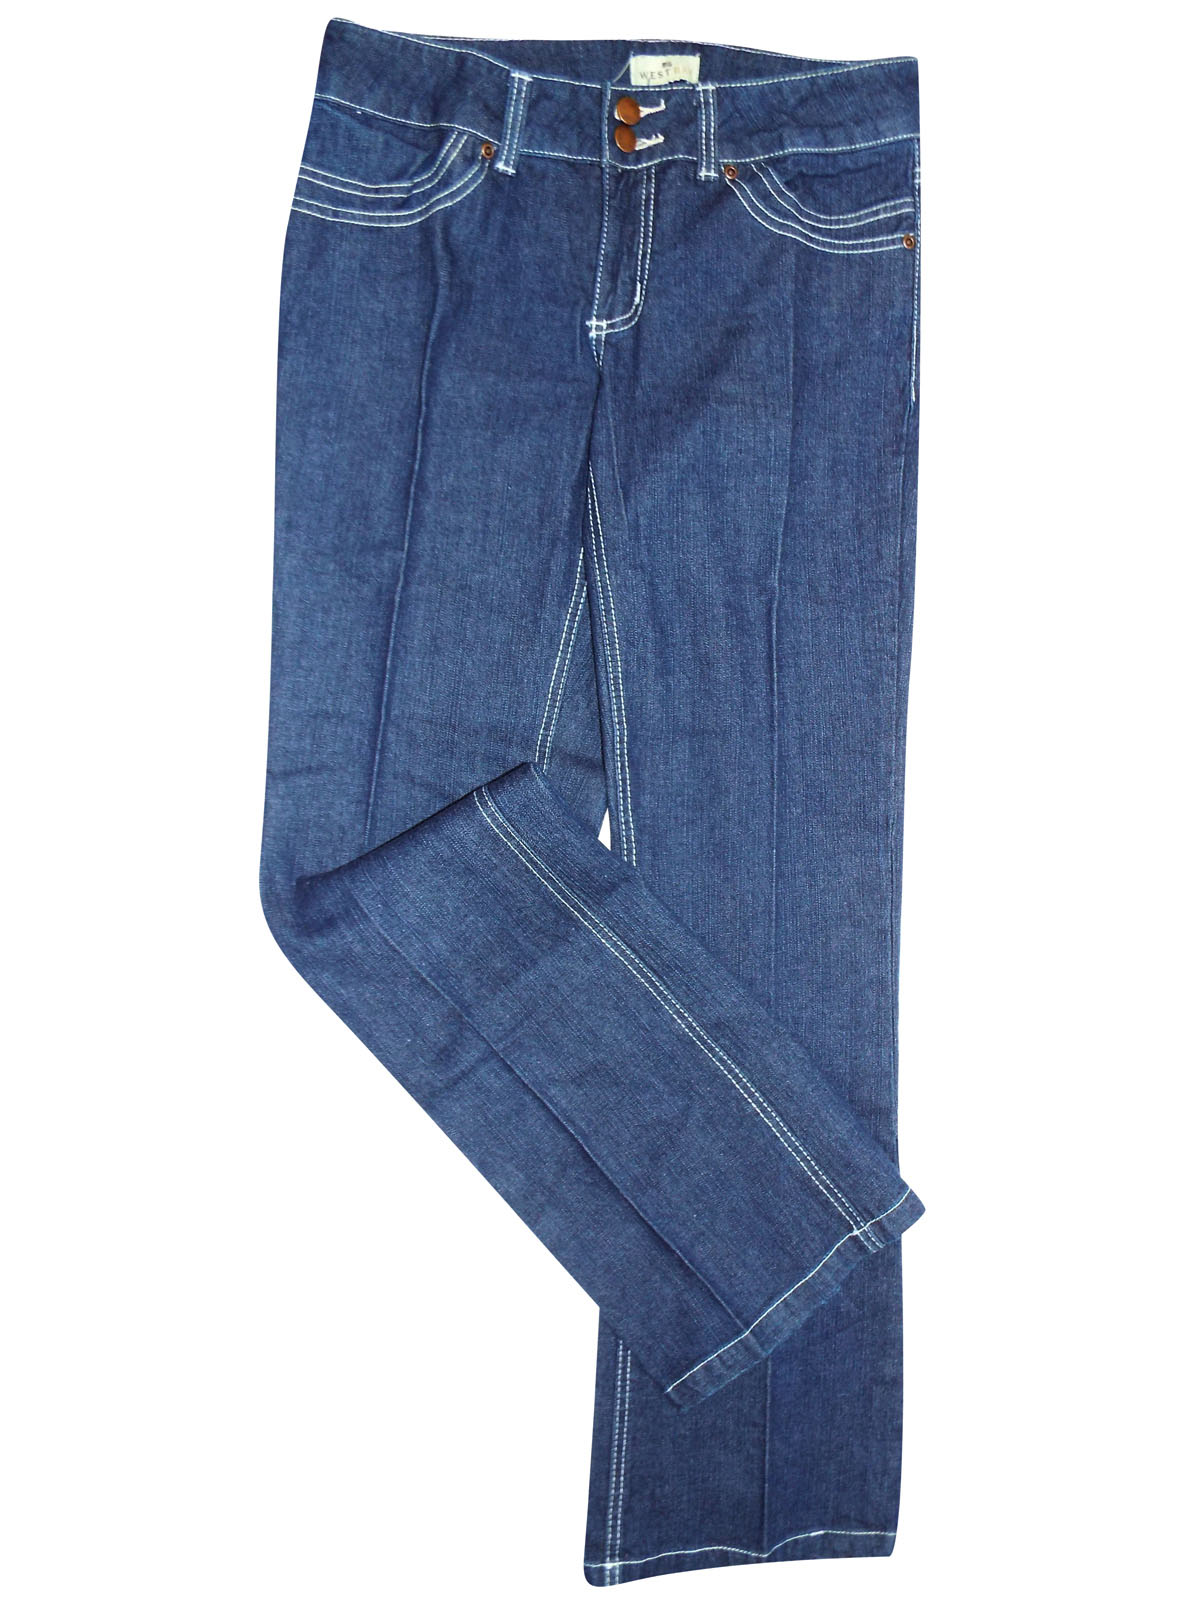 ASSORTED Ladies Denim Jeans - Size 10 to 18